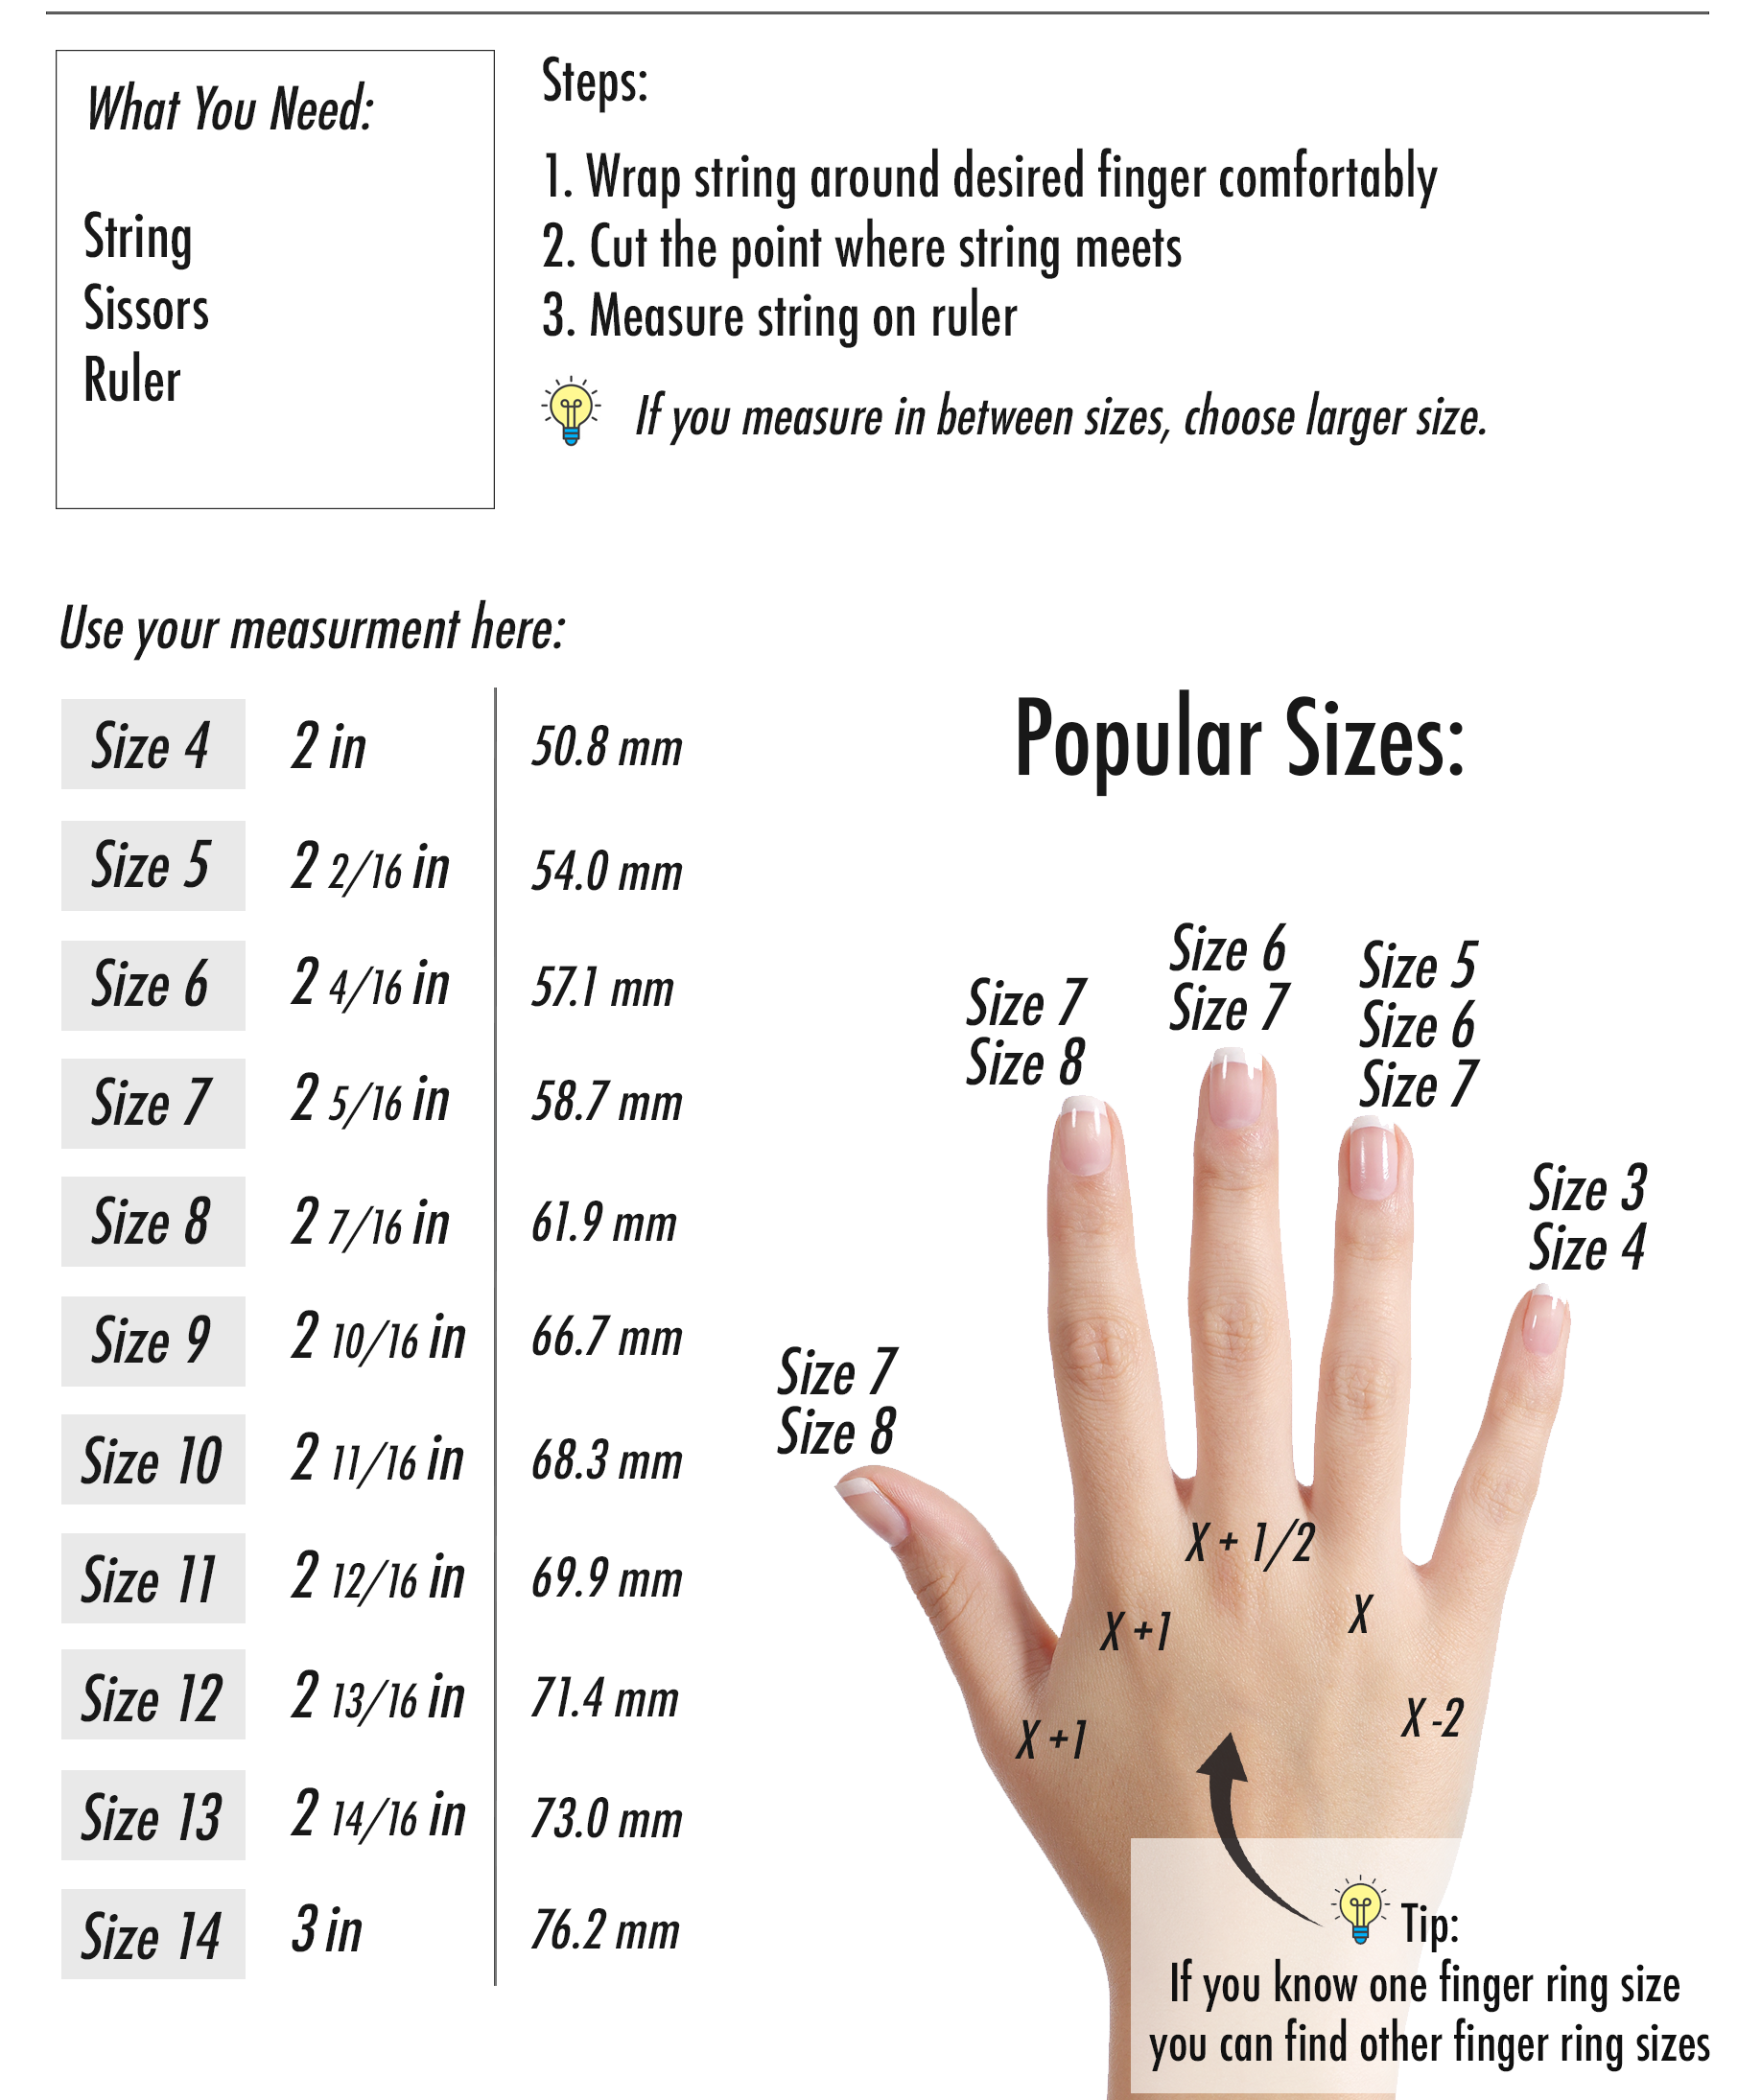 Steps:  1. Wrap string around desired finger comfortably 2. Cut the point where string meets  3. Measure string on ruler. If you measure in between sizes, choose larger size. 